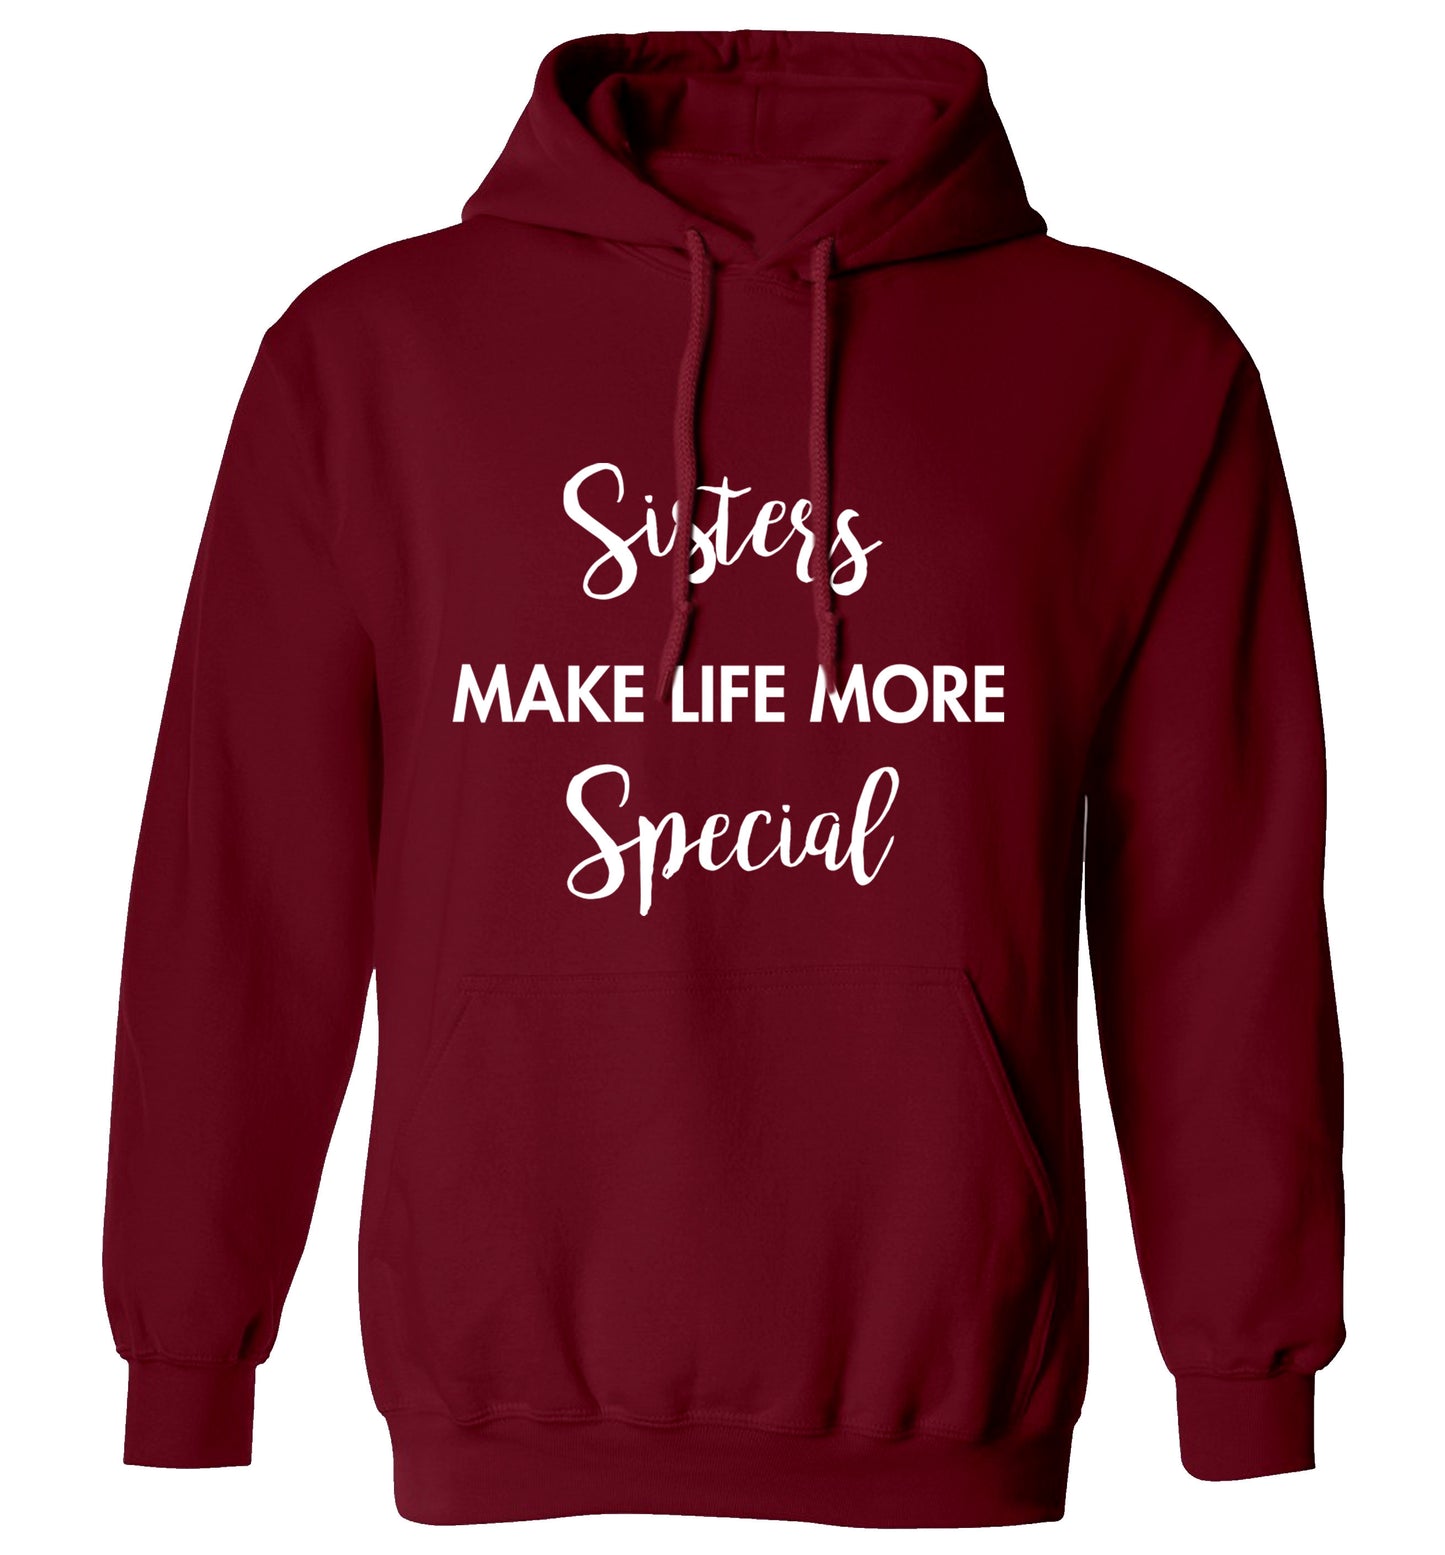 Sisters make life more special adults unisex maroon hoodie 2XL